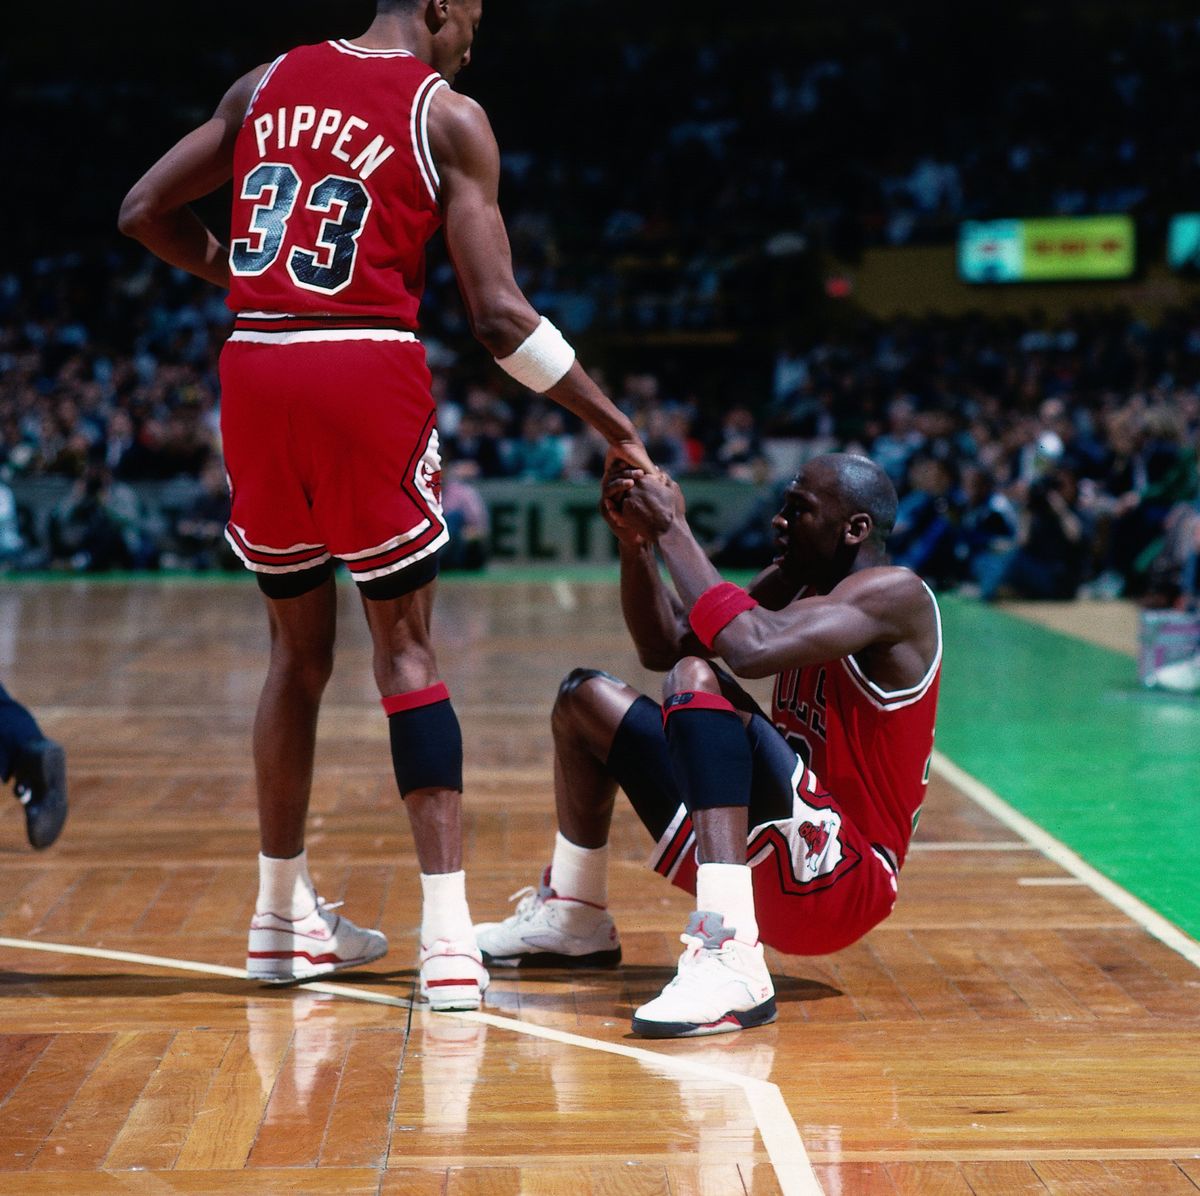 boston   1990  scottie pippen 33 helps michael jordan 23 of the chicago bulls up from the floor against the boston celtics during a game played in 1990 at the boston garden in boston, massachusetts note to user user expressly acknowledges and agrees that, by downloading and or using this photograph, user is consenting to the terms and conditions of the getty images license agreement mandatory copyright notice copyright 1990 nbae photo by dick raphaelnbae via getty images